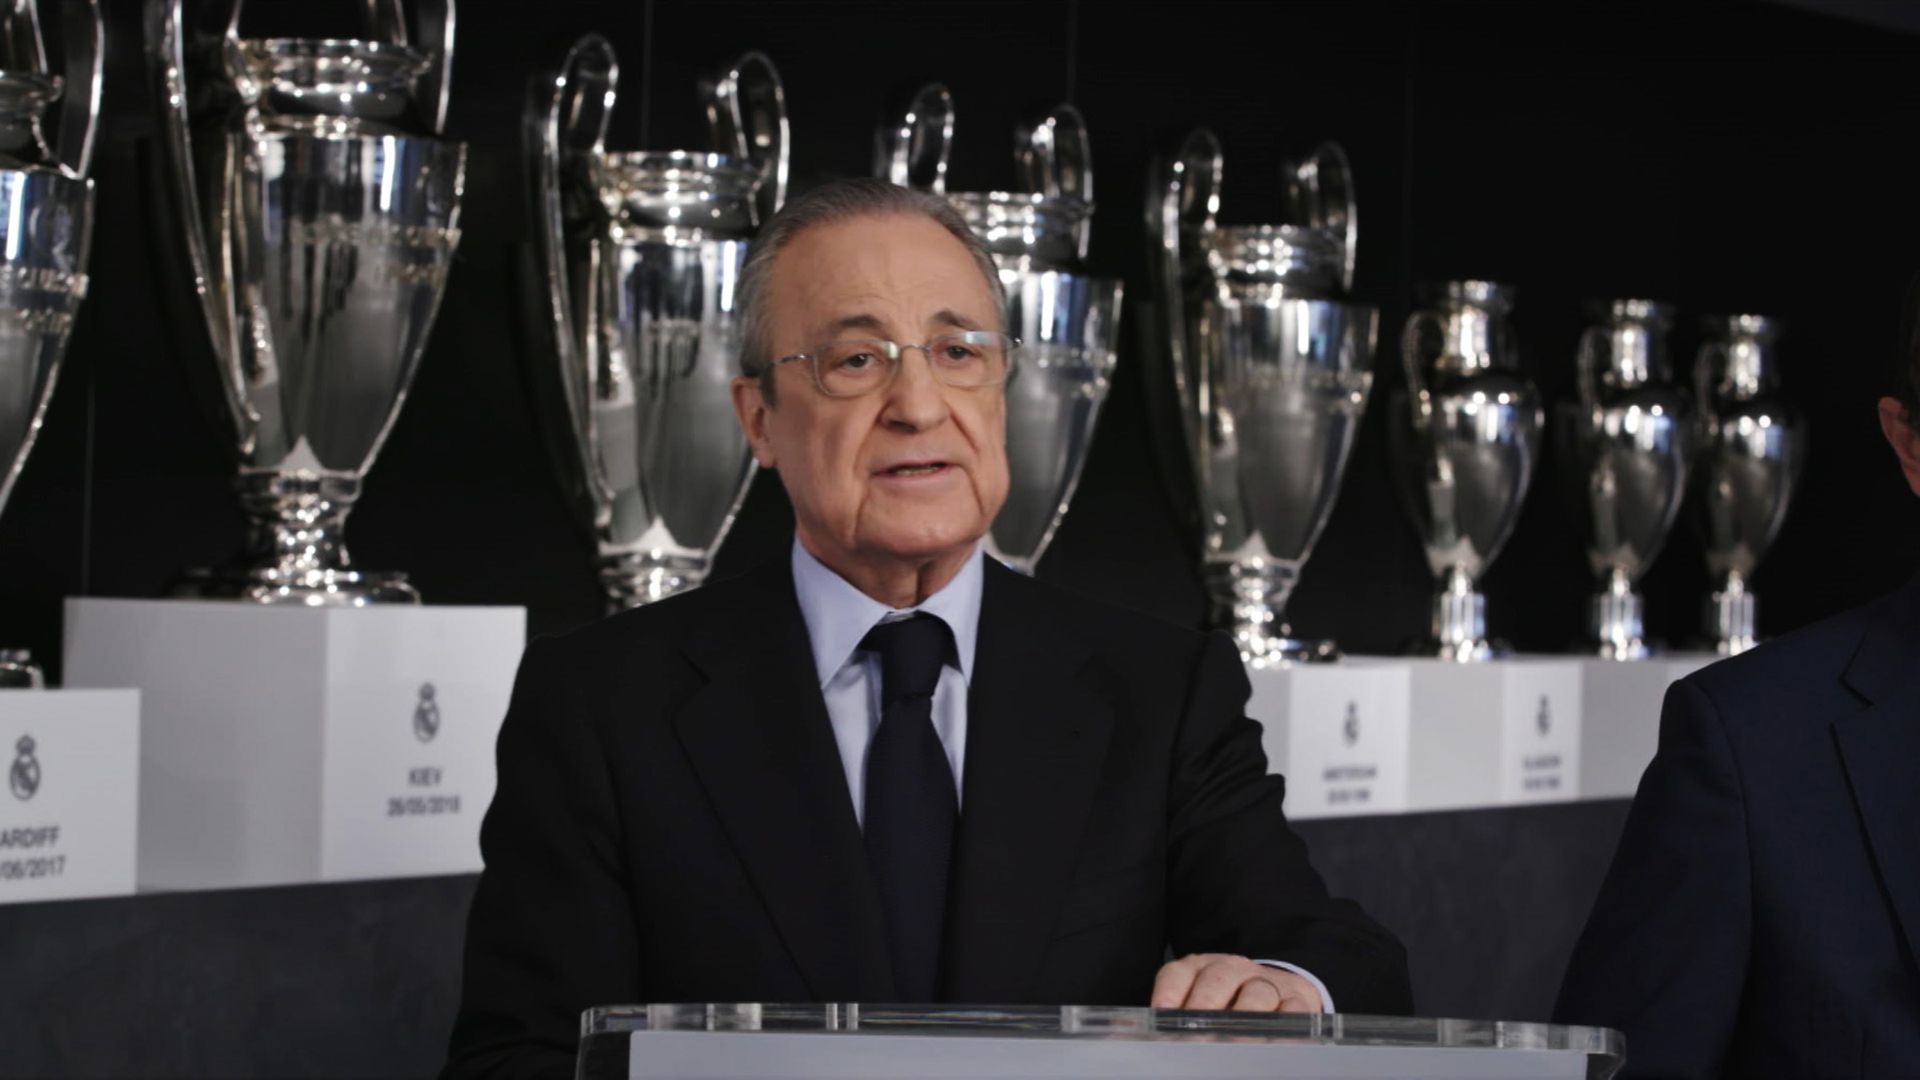 Florentino Pérez, the president of Real Madrid (Credit: Getty Images)